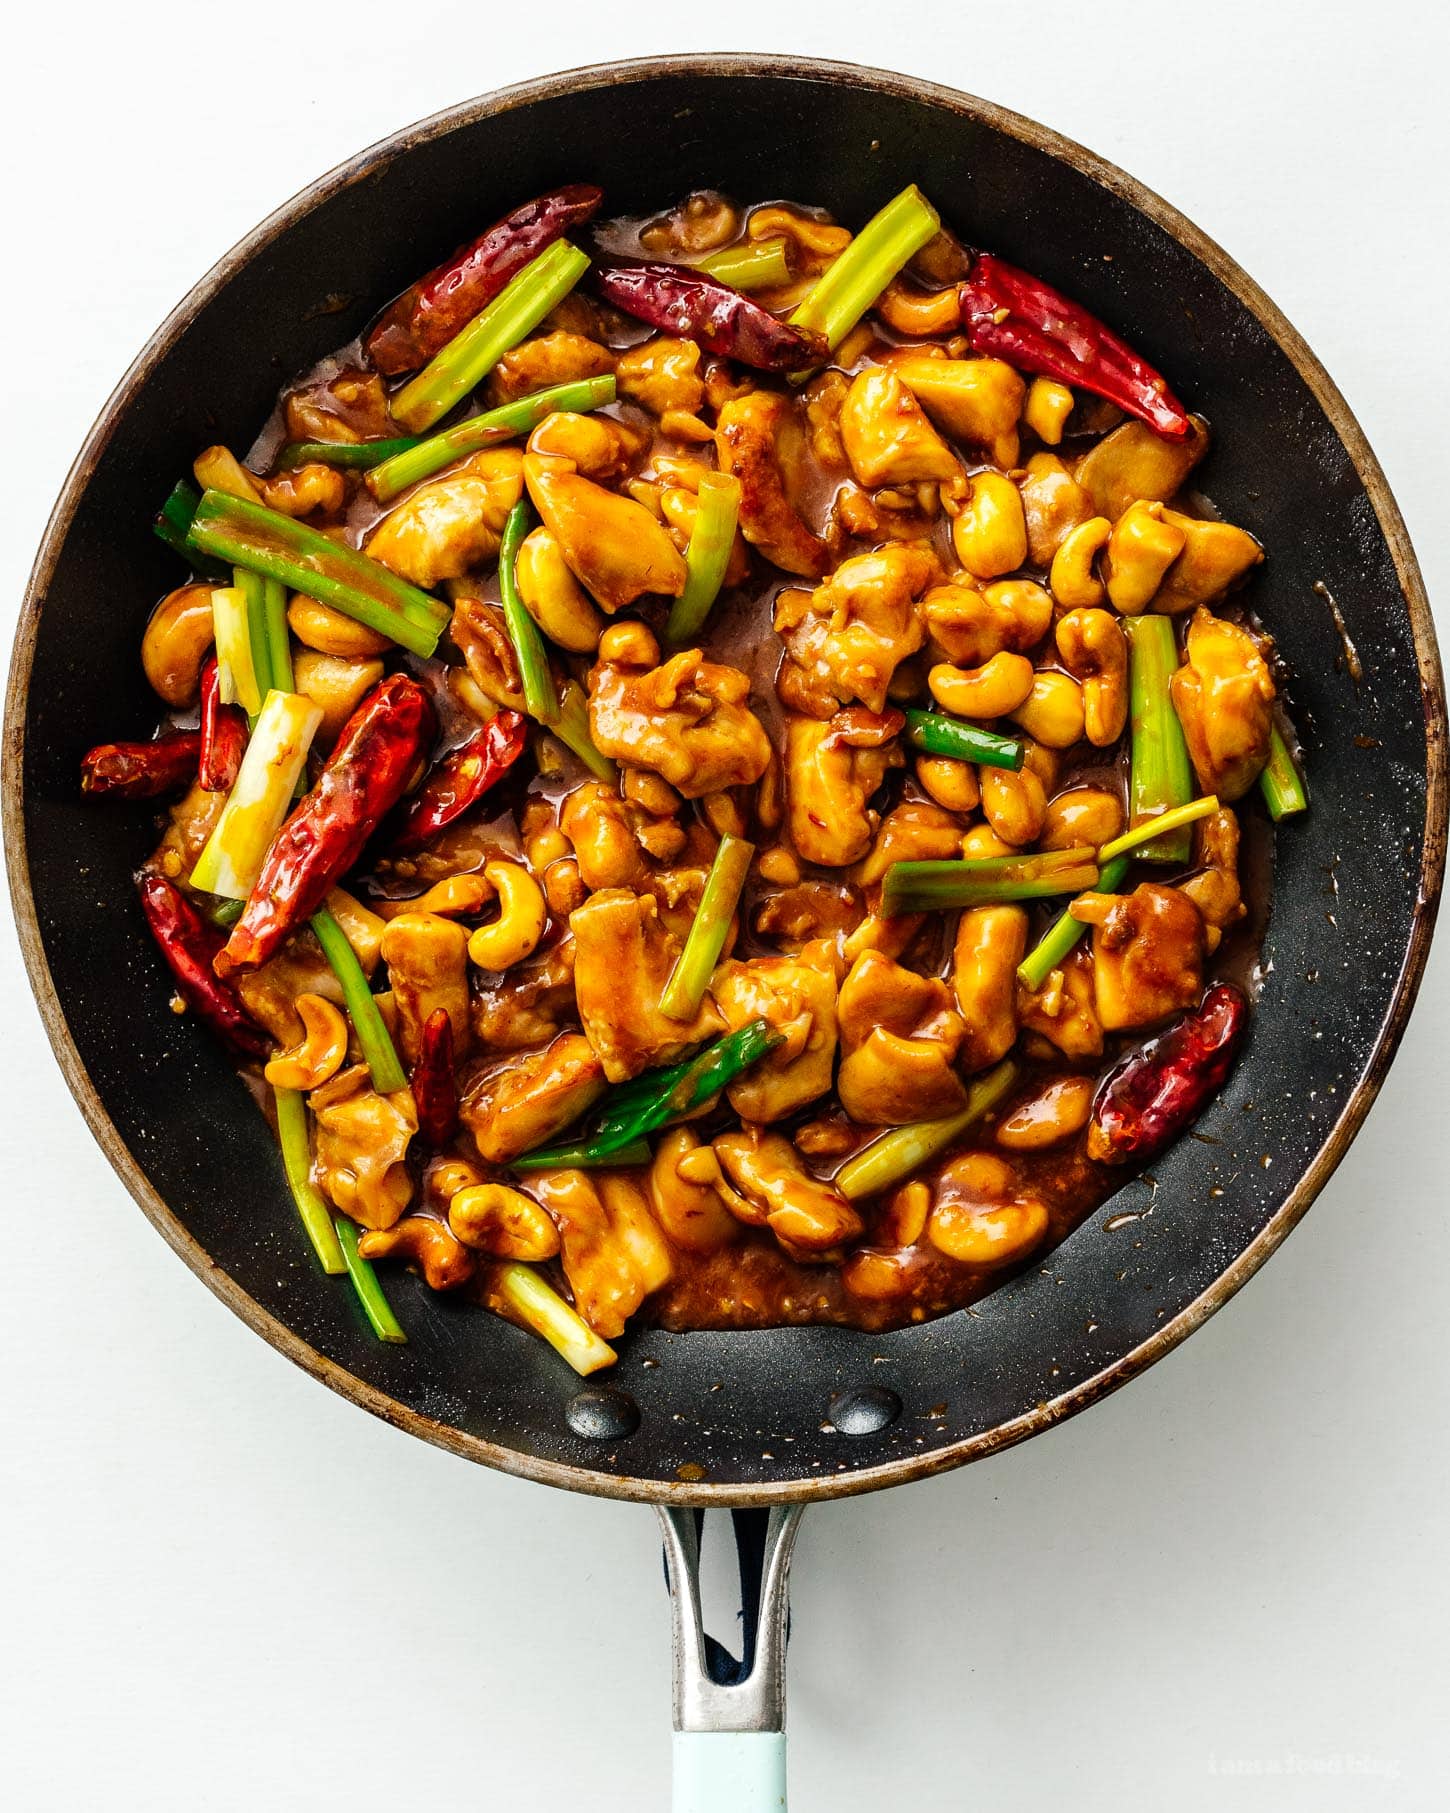 polo kung pao | www.http://elcomensal.es/